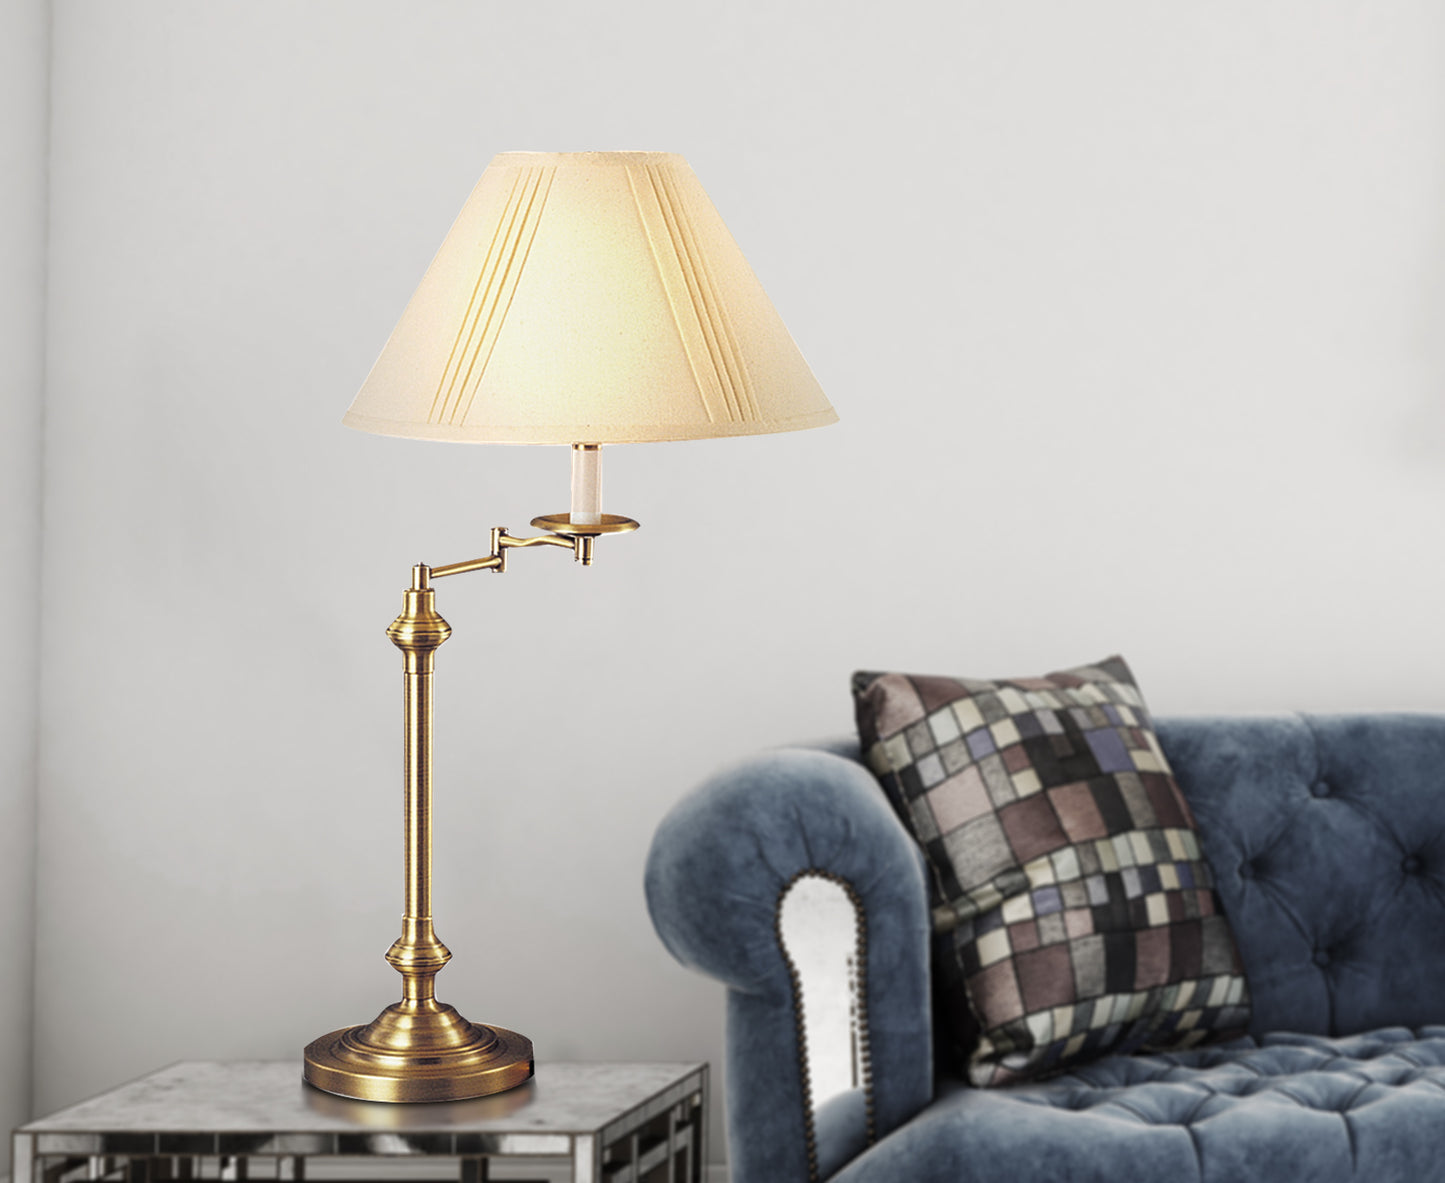 30" Bronze Metal Table Lamp With Off White Empire Shade